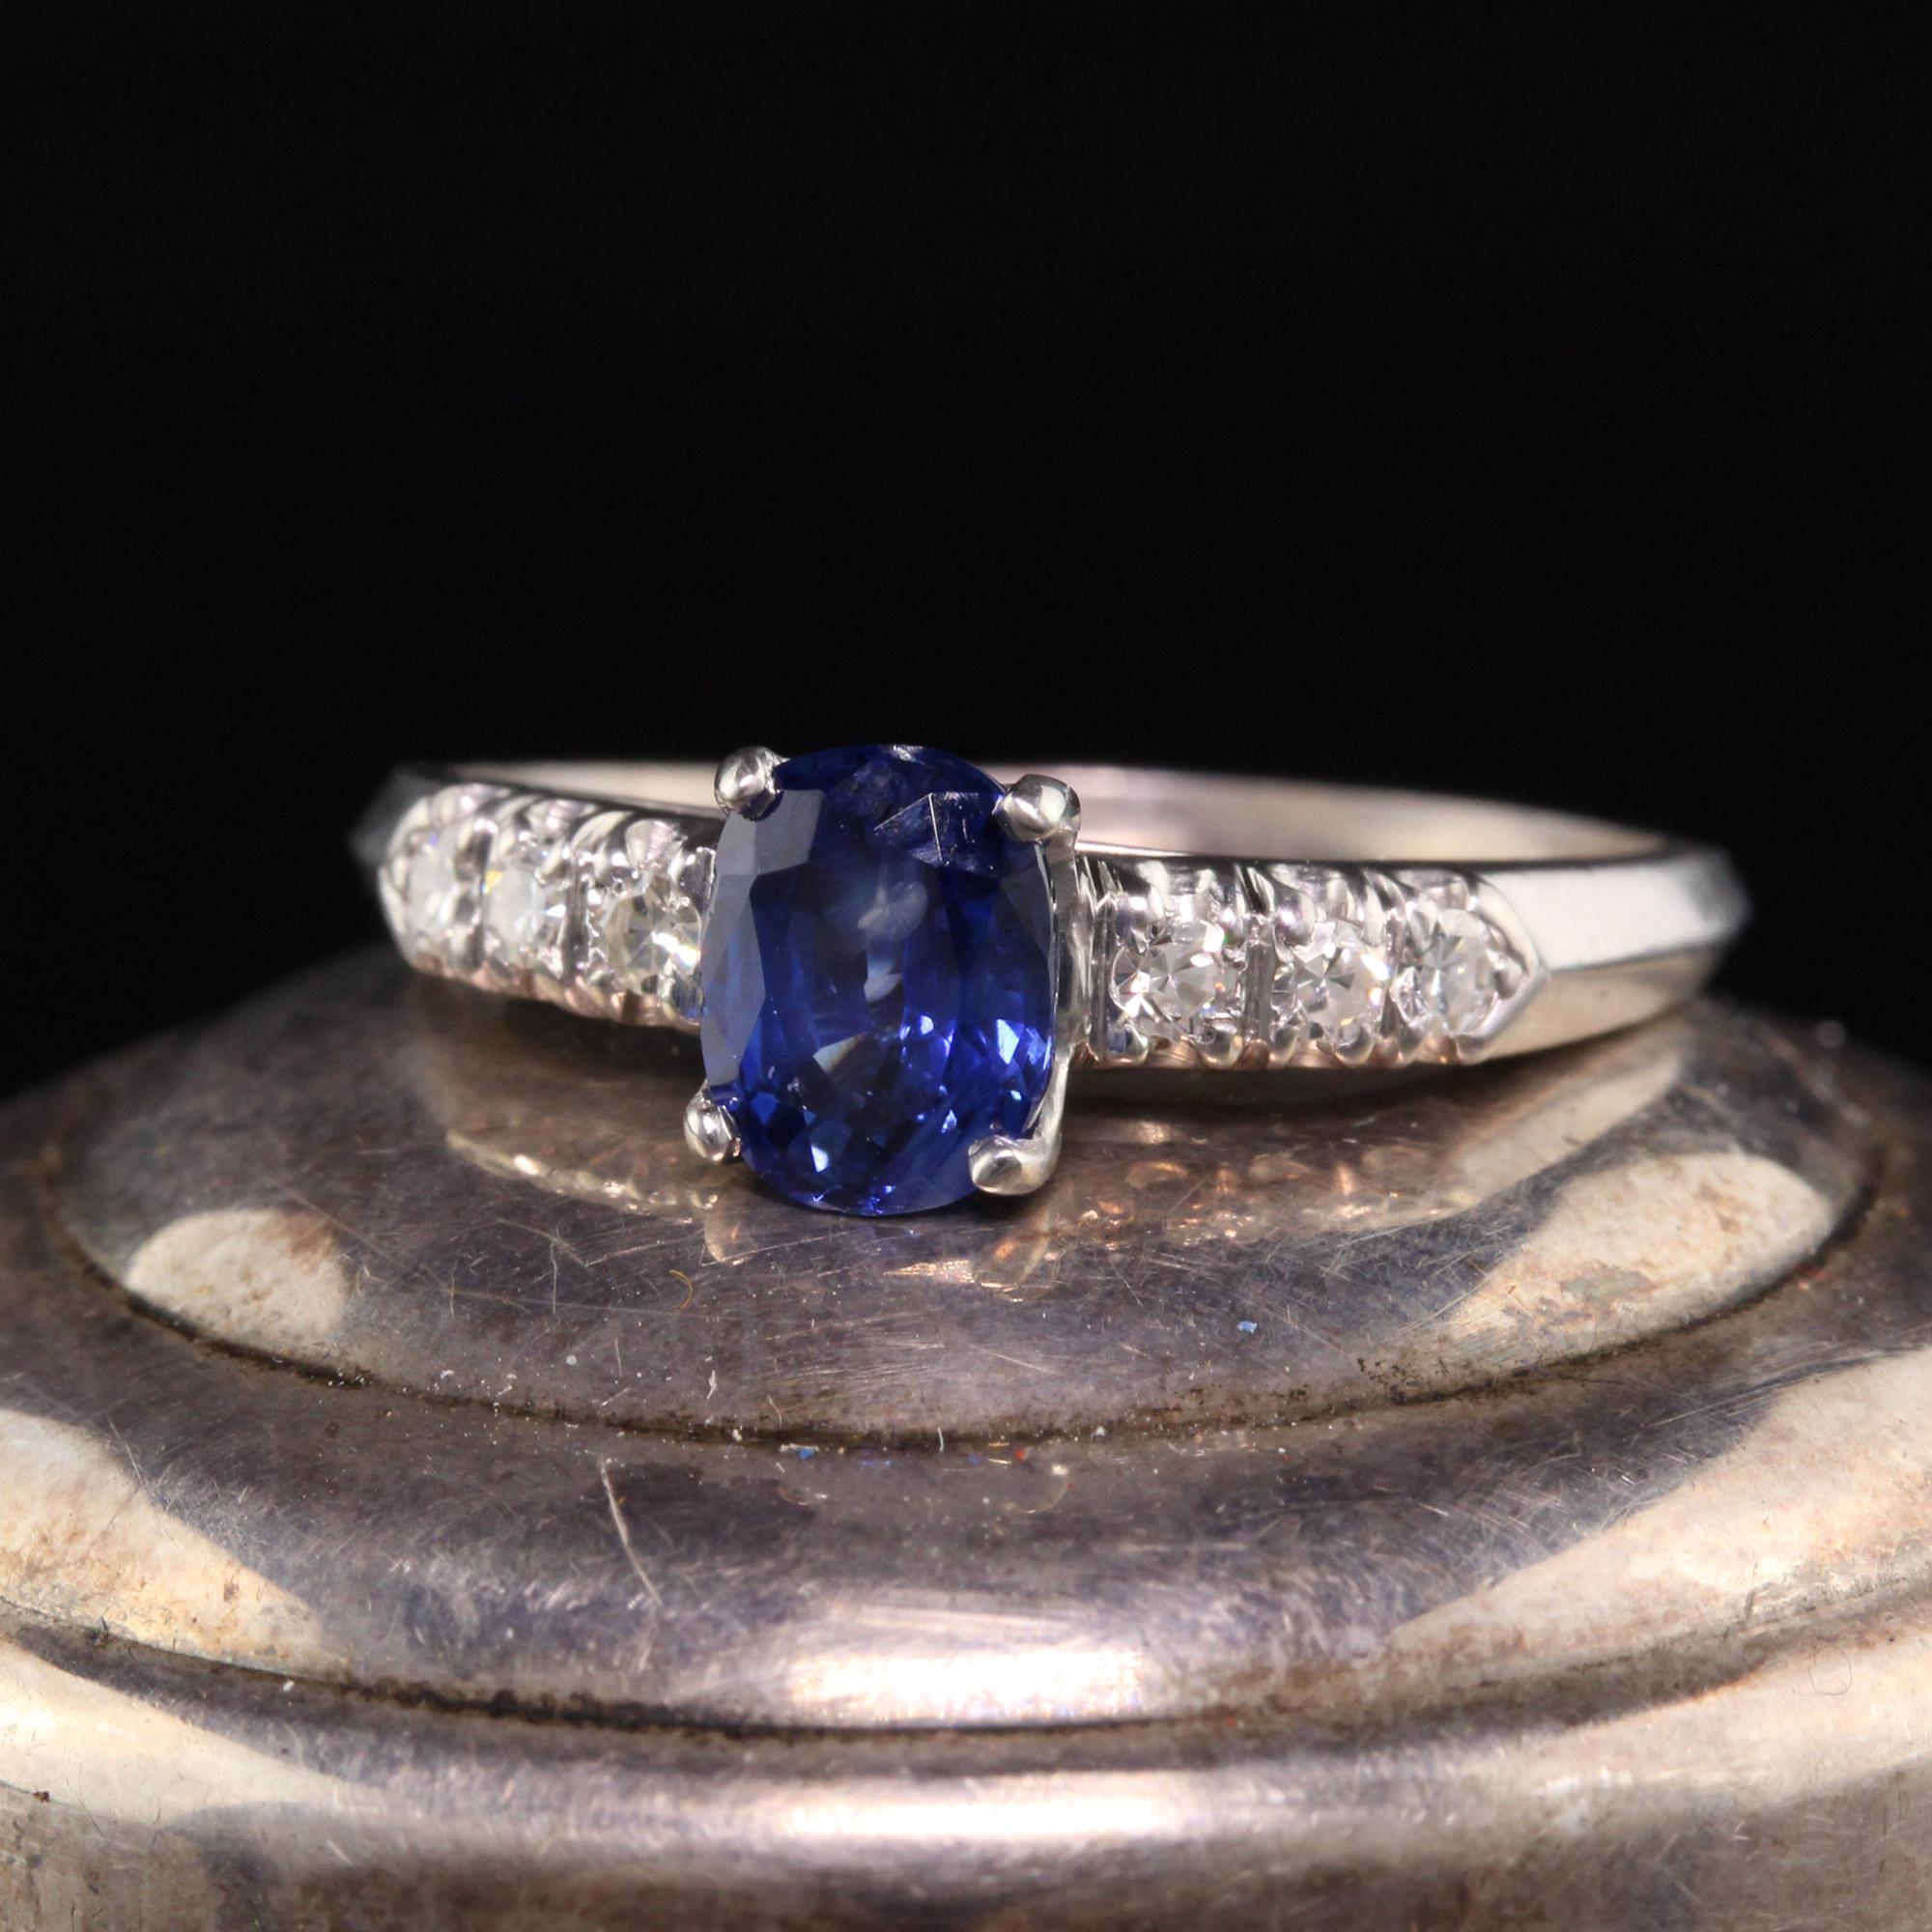 Beautiful Antique Art Deco Platinum Sapphire and Diamond Engagement Ring. This classic engagement ring is crafted in platinum. The center holds a gorgeous blue sapphire set in an art deco mounting.

Item #R1242

Metal: Platinum

Weight: 2.9